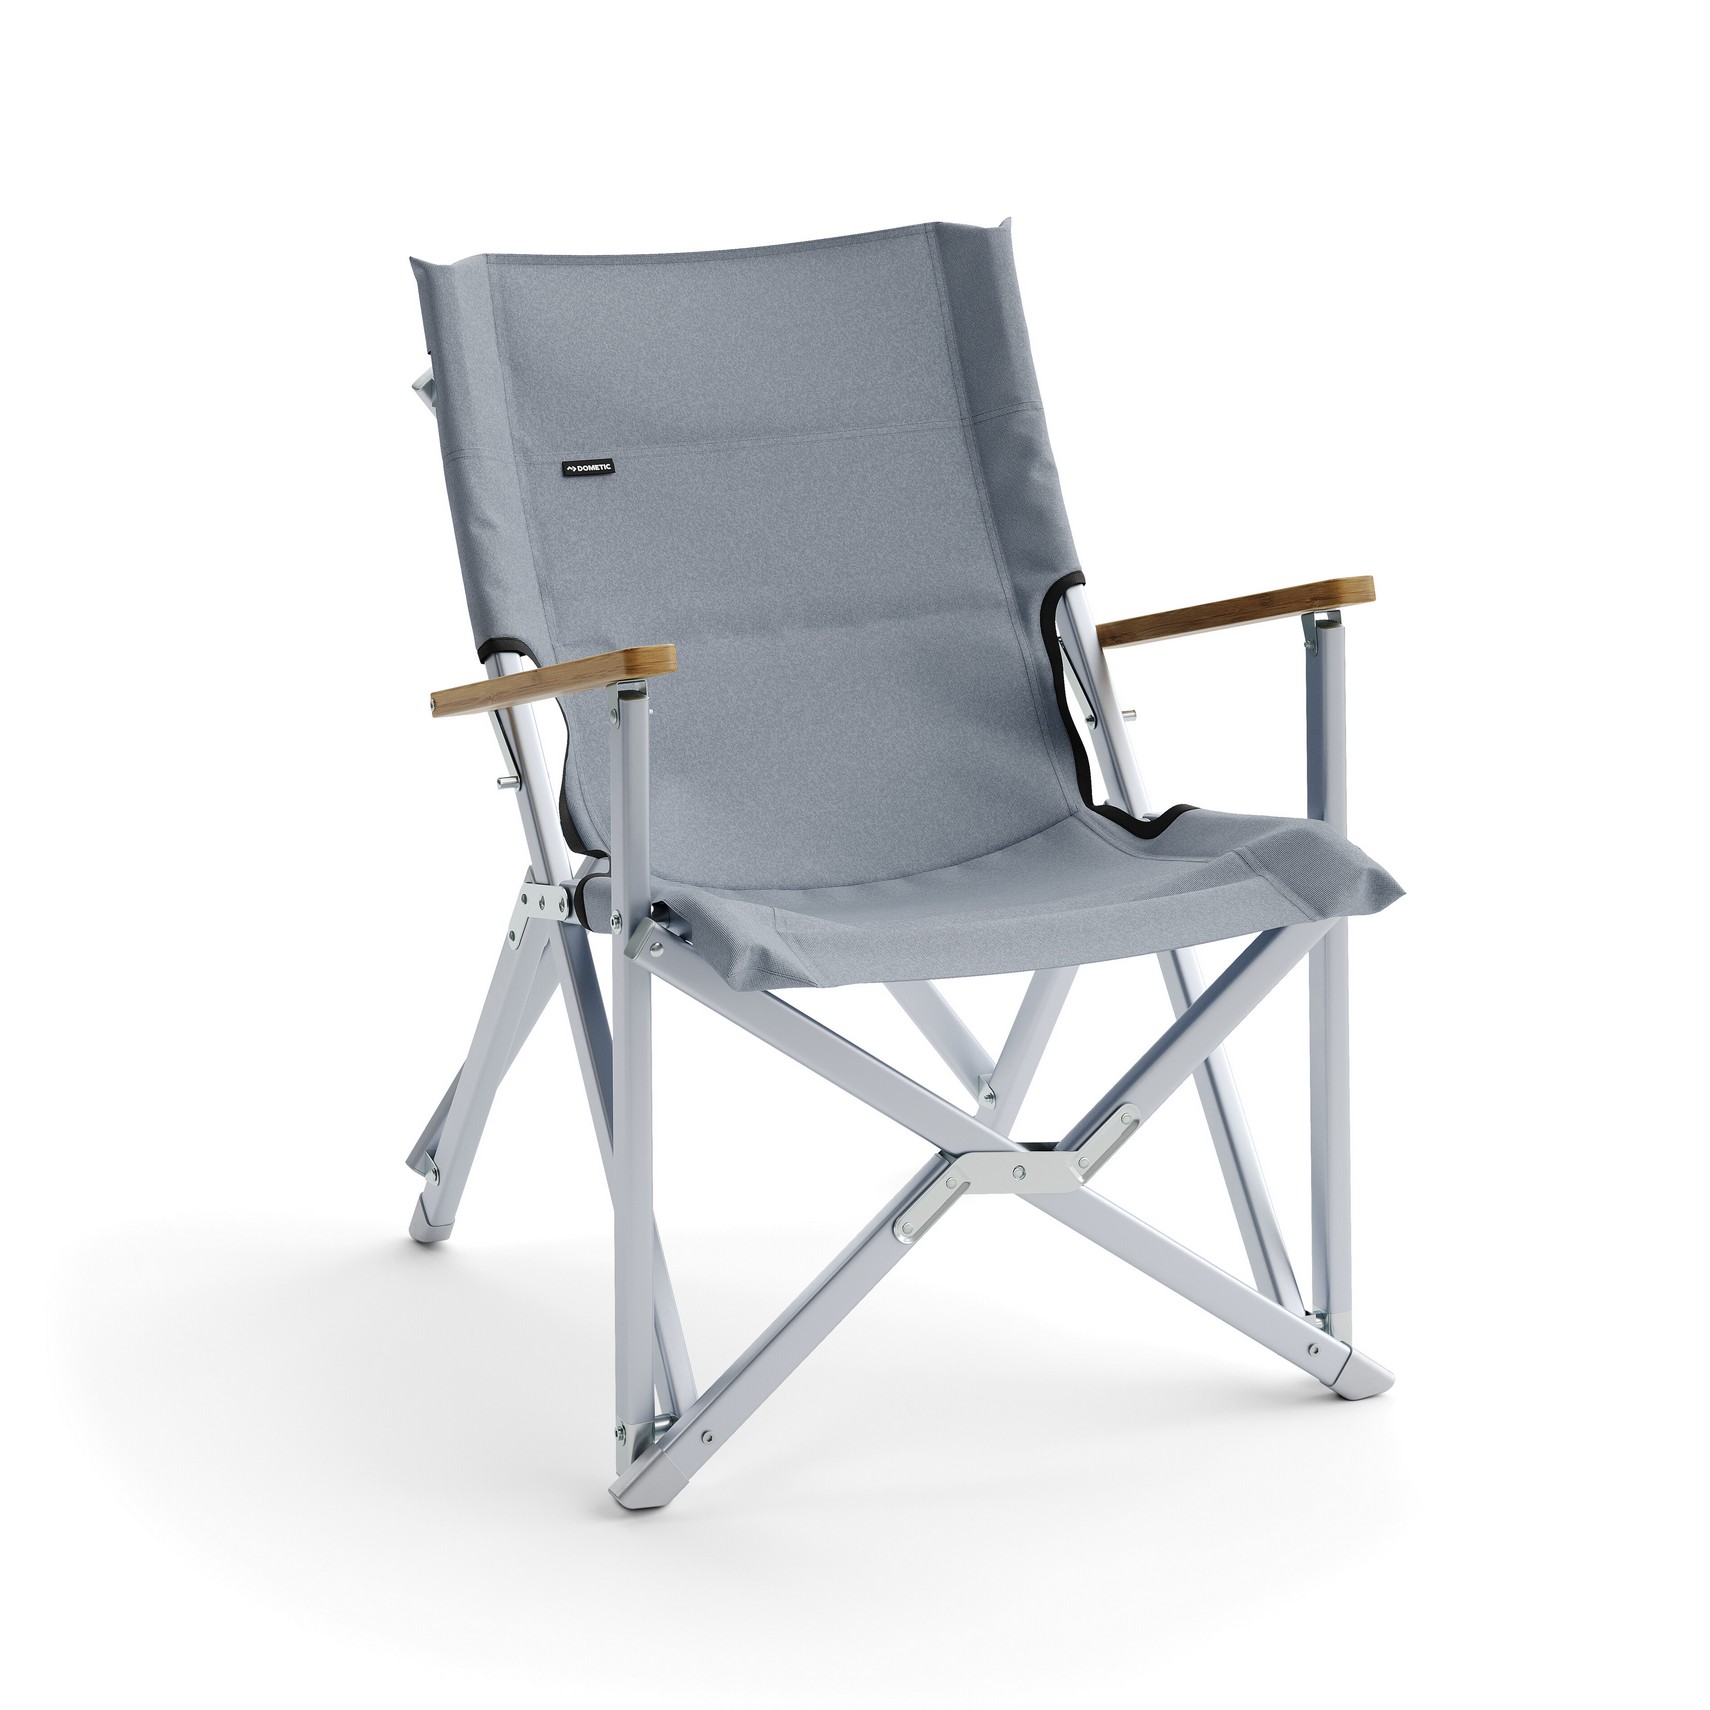 Dometic "Compact Camp Chair" - silt